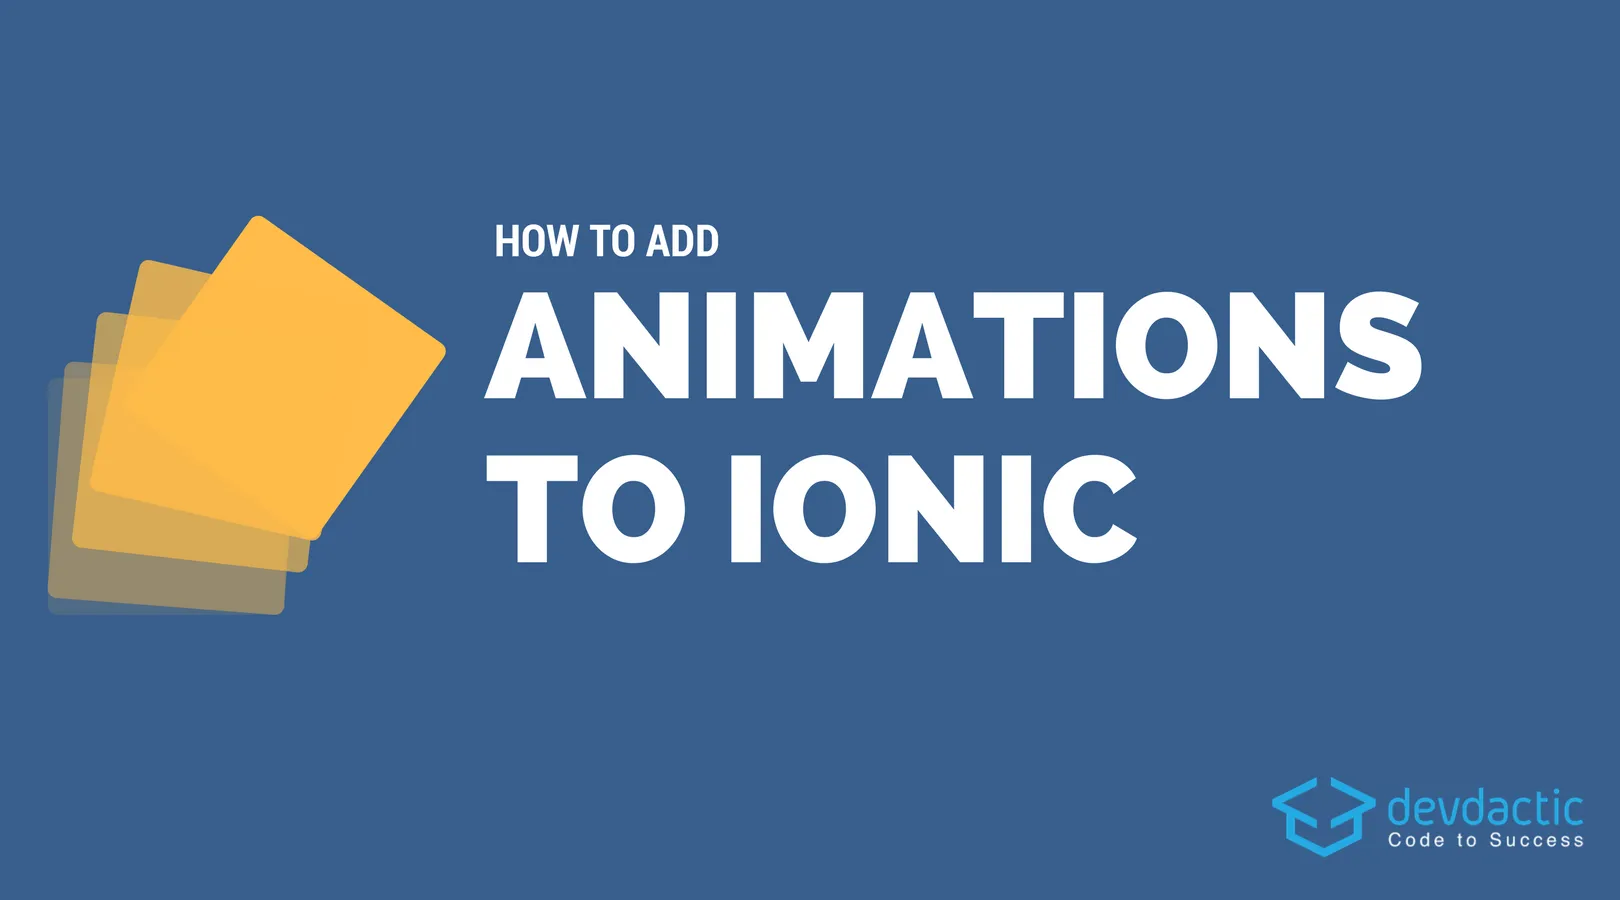 How to Add Ionic Animations Using Angular (2 Different Ways!)